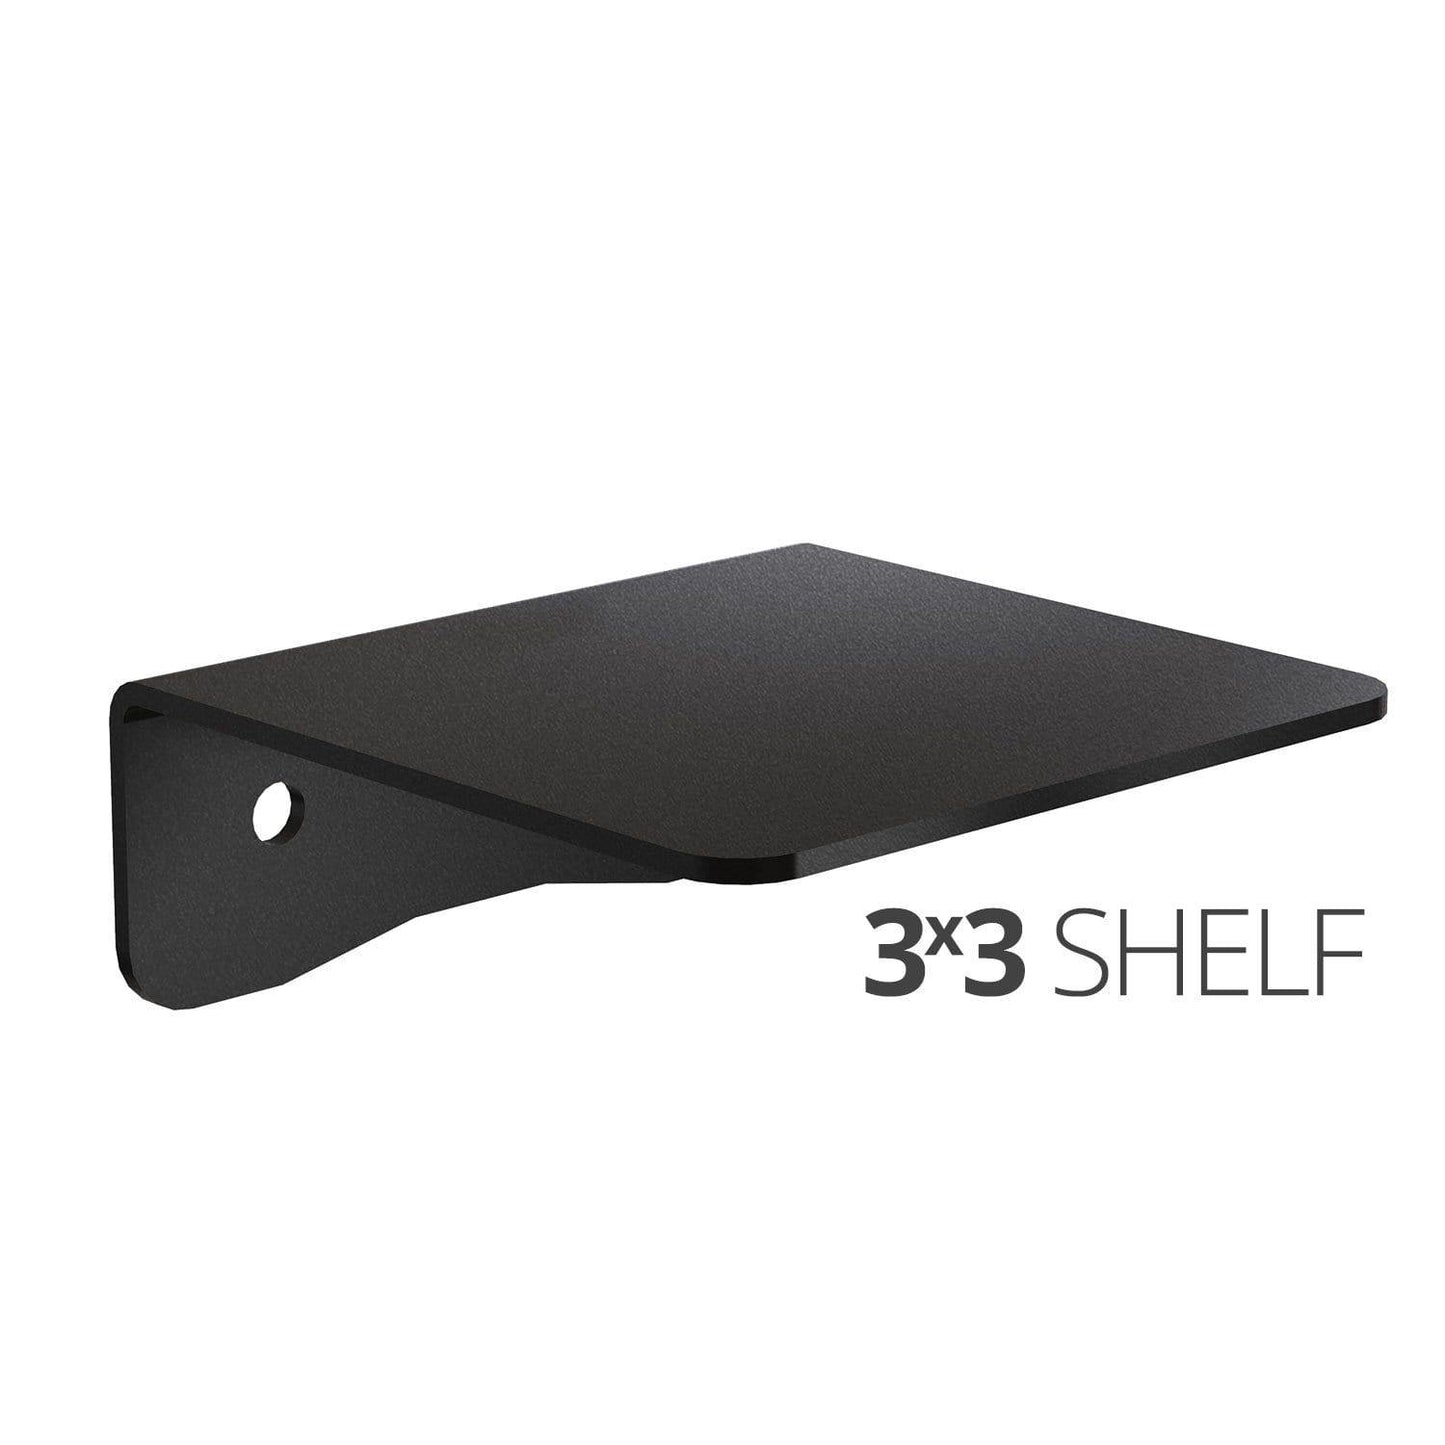 Small wall mounted shelf for home, office and garage - 3x3 angle